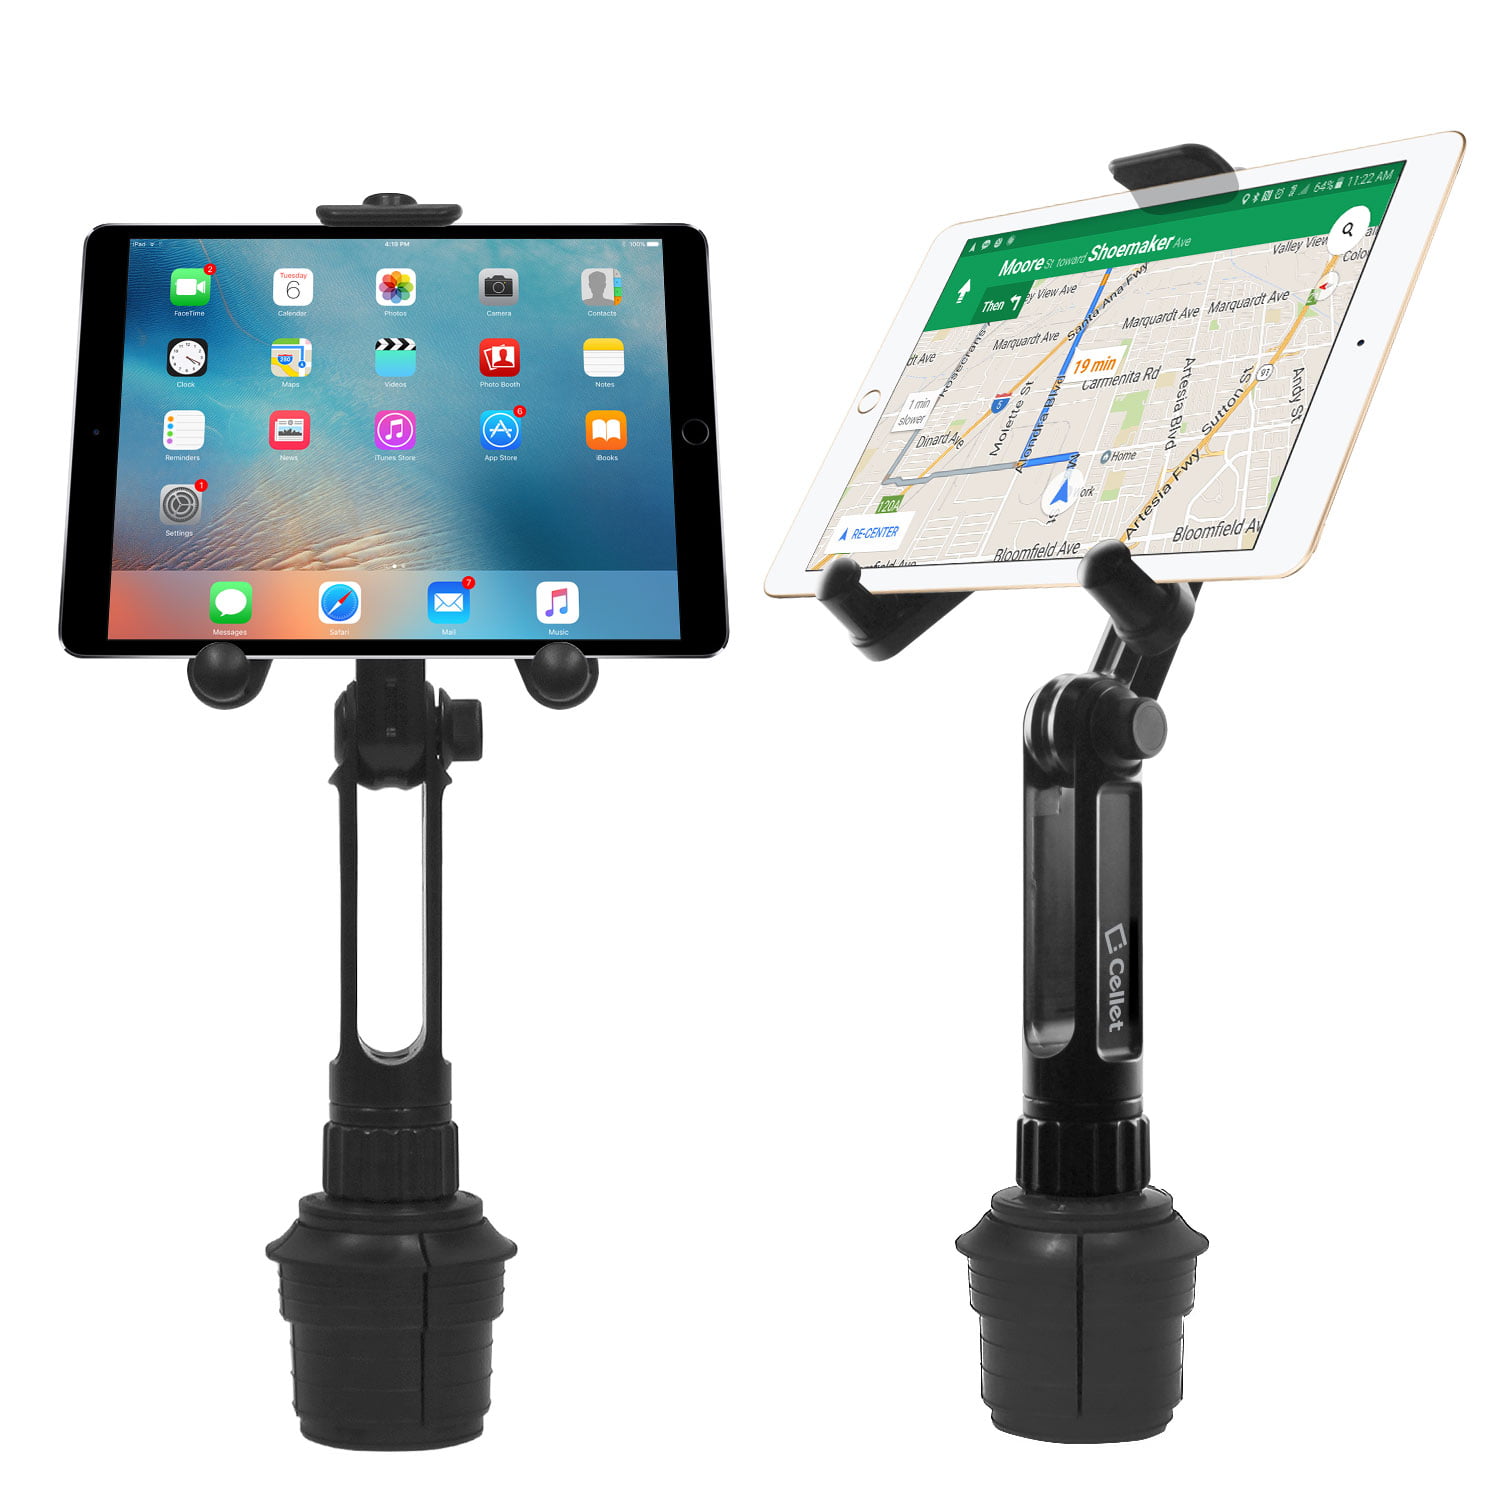 More 4-13 Cell Phones and Tablets woleyi Car Cupholder Tablet & Phone Holder with Adjustable Arm for iPad Pro 9.7 iPhone Samsung Galaxy Tabs 11 12.9 Air Mini 5 4 3 2 Cup Holder Car Tablet Mount 